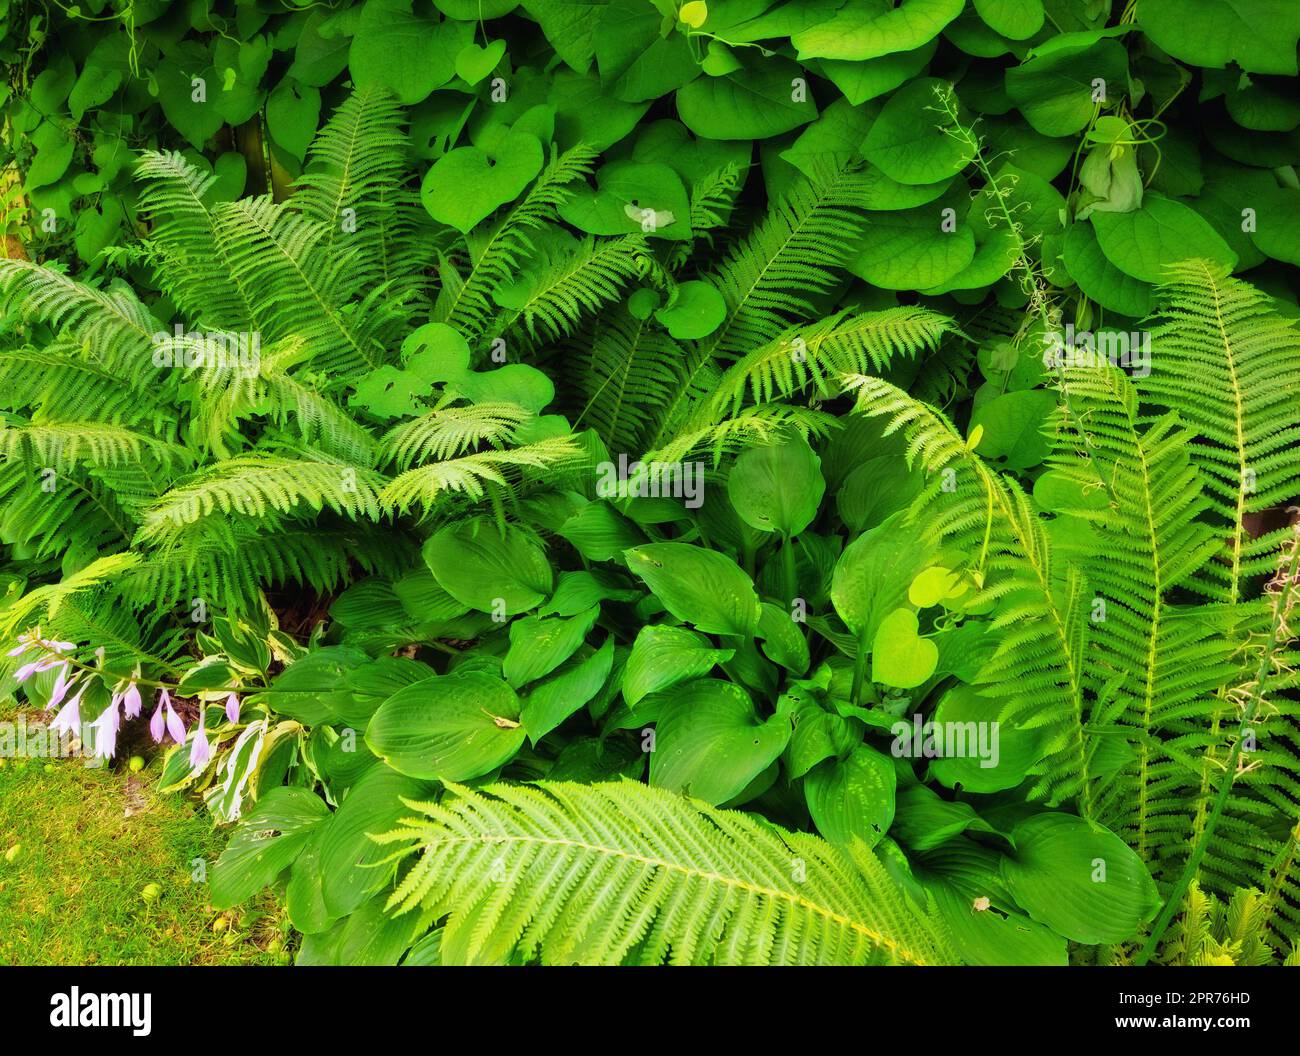 Fern and tropical plants in the garden on a sunny day. Many kinds of green shrubs in the backyard with green foliage natural floral fern and mixed plants. Beautiful small greenish vegetation. Stock Photo